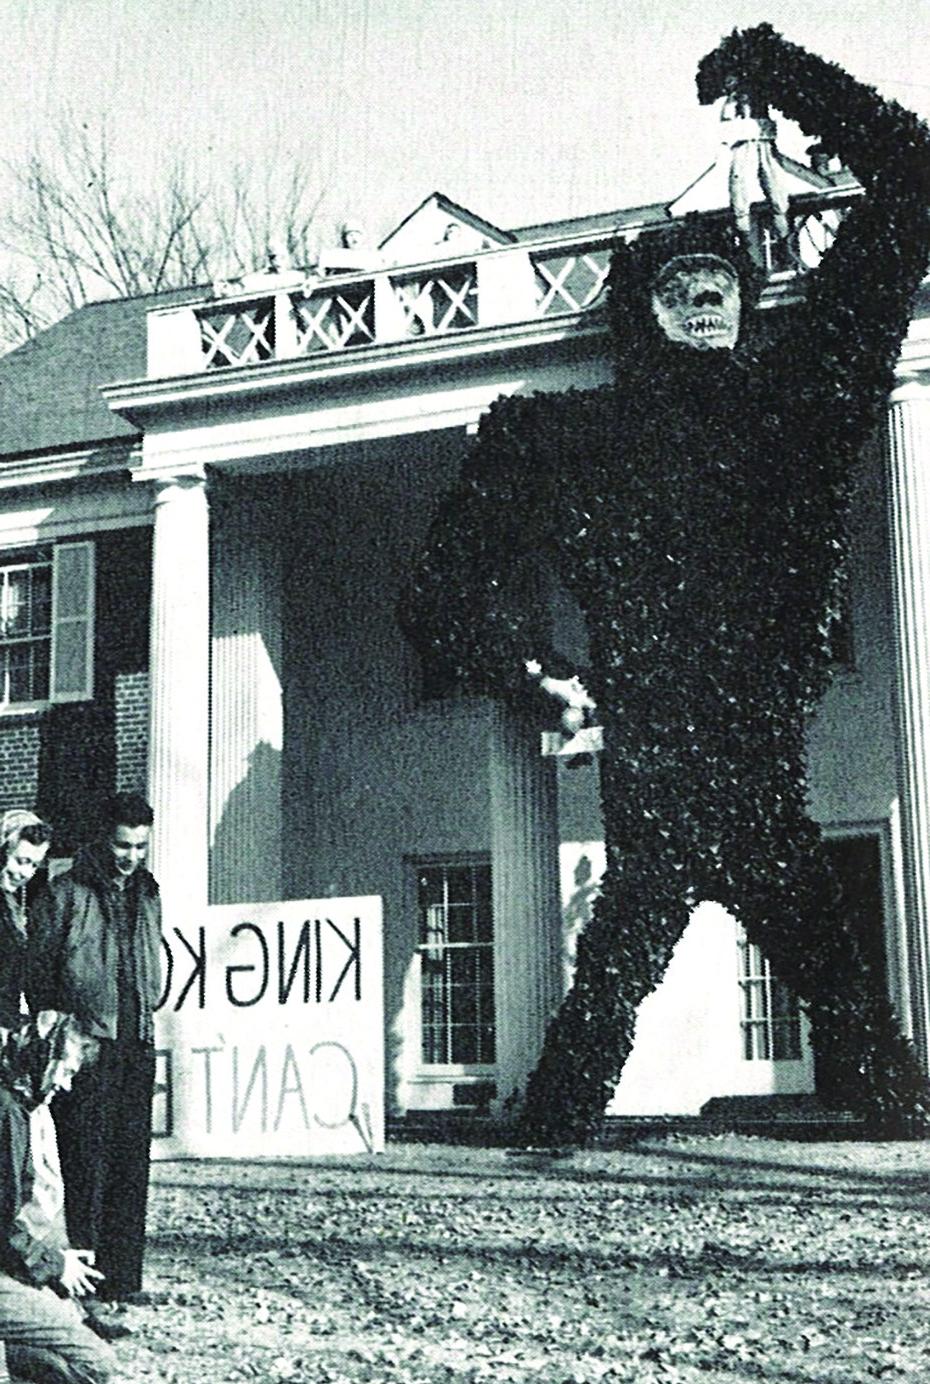 Themes of crushing football opponents took on lives of their own, such as a two-story King Kong.